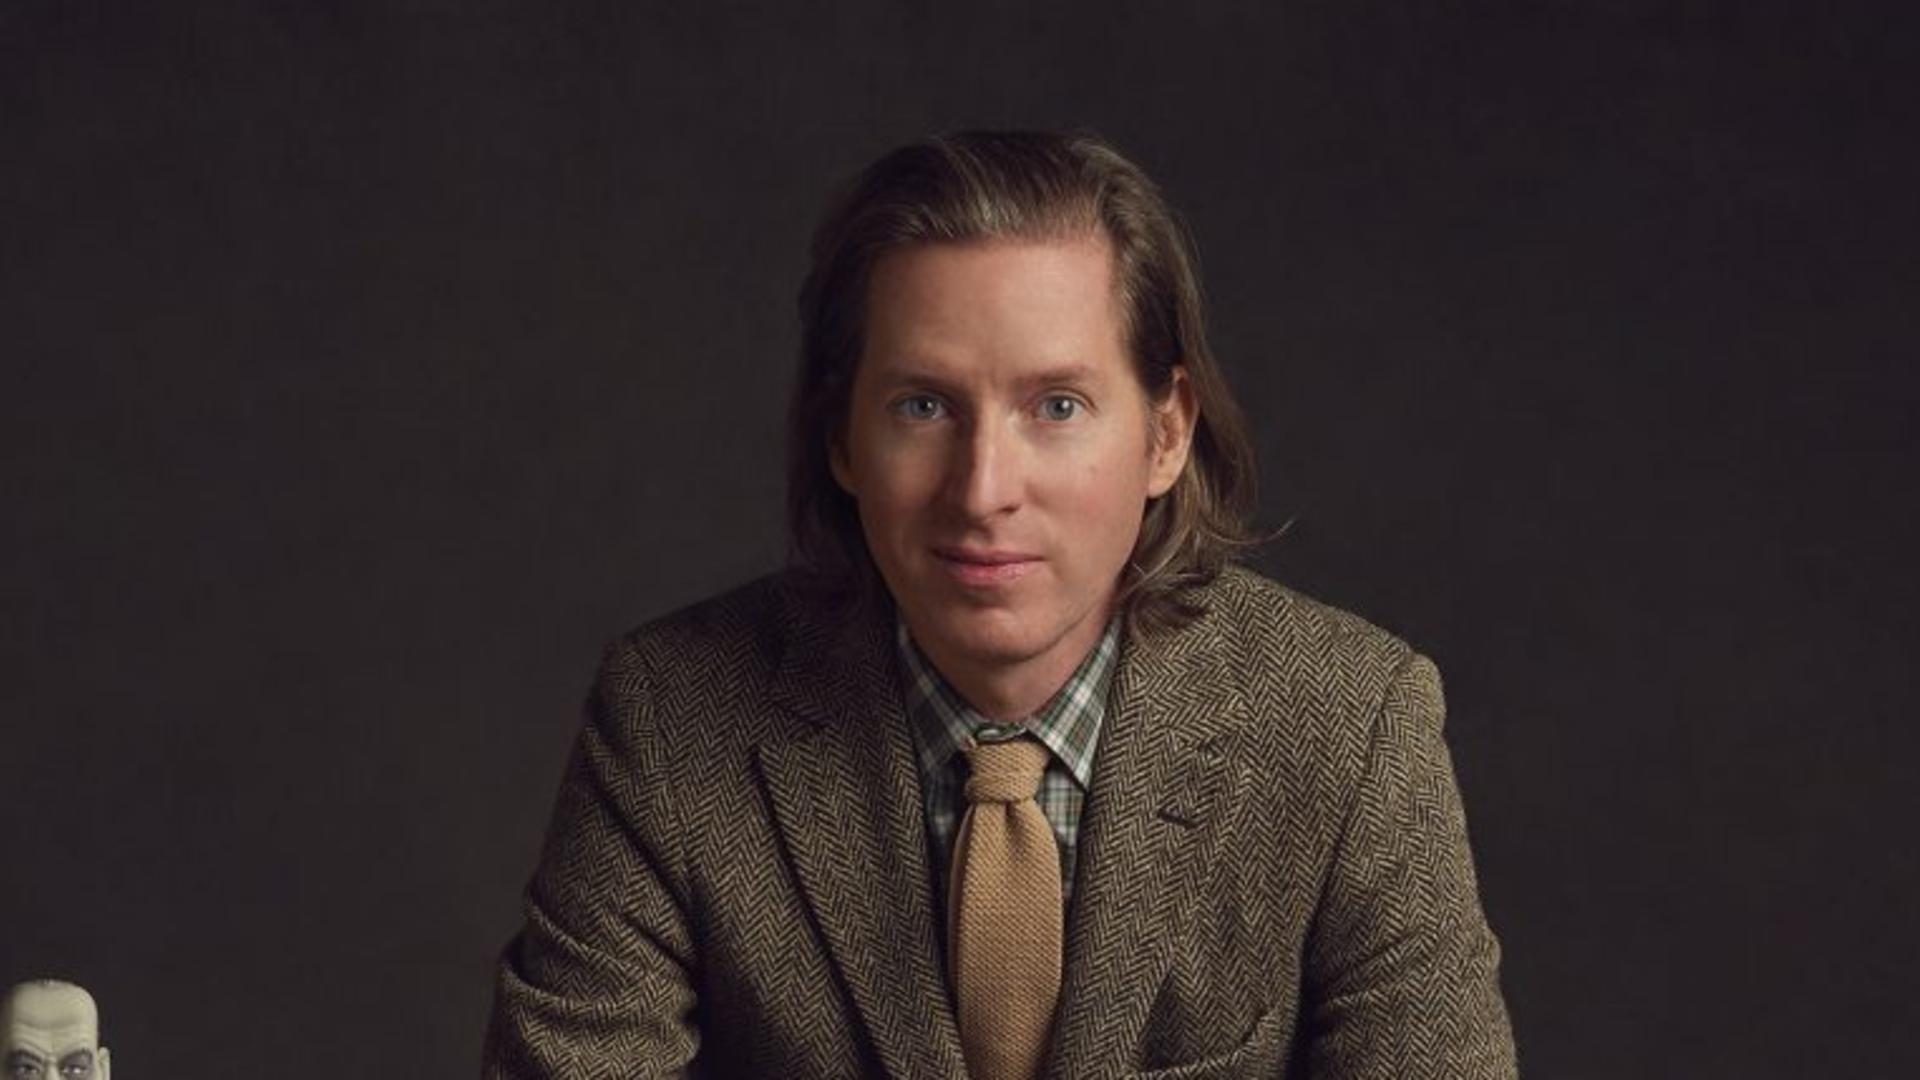 Message from Wes Anderson